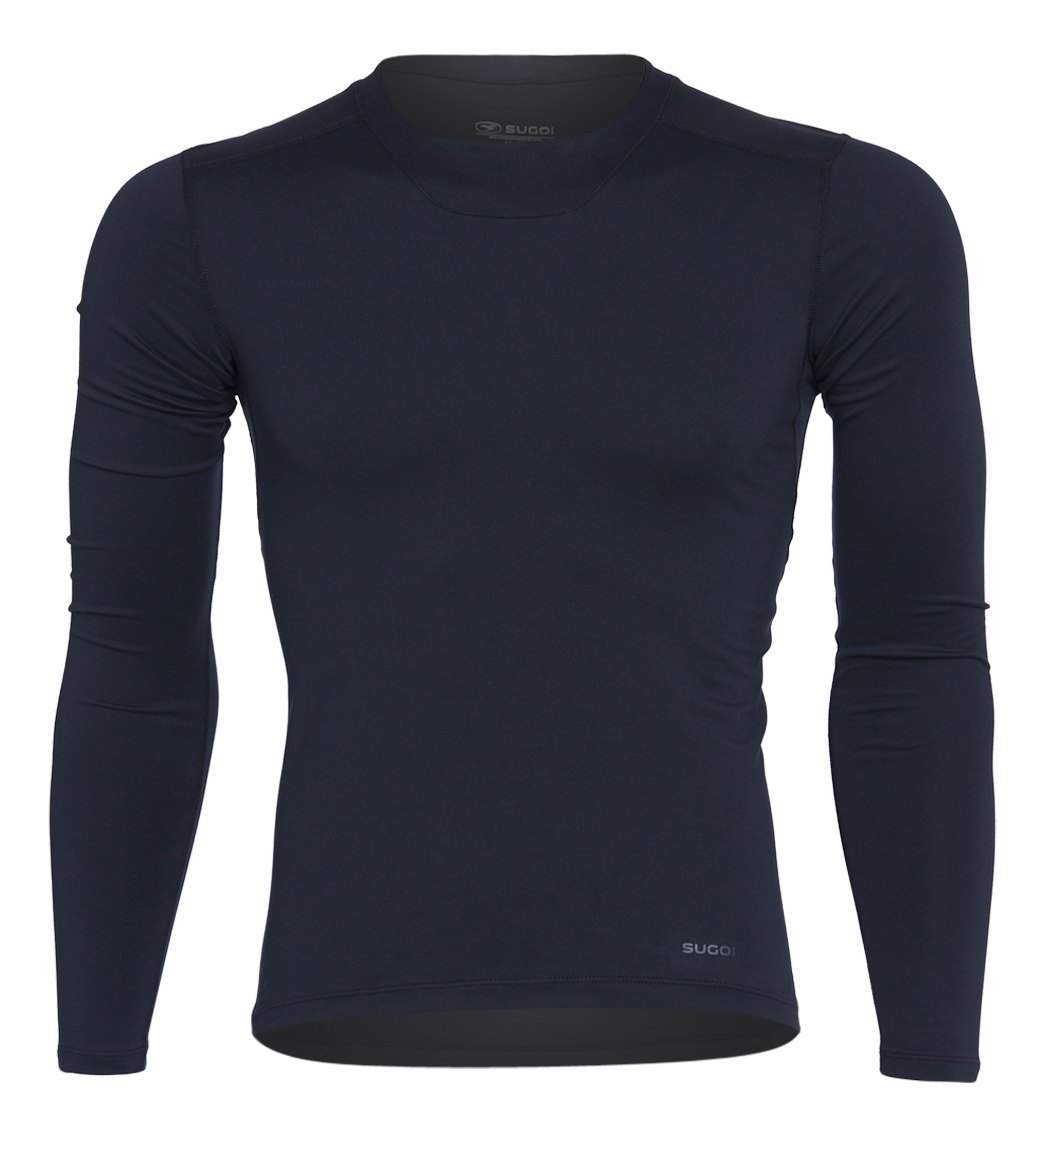 Sugoi Men's Long Sleeve Thermal Base Layer - Black Small - Swimoutlet.com